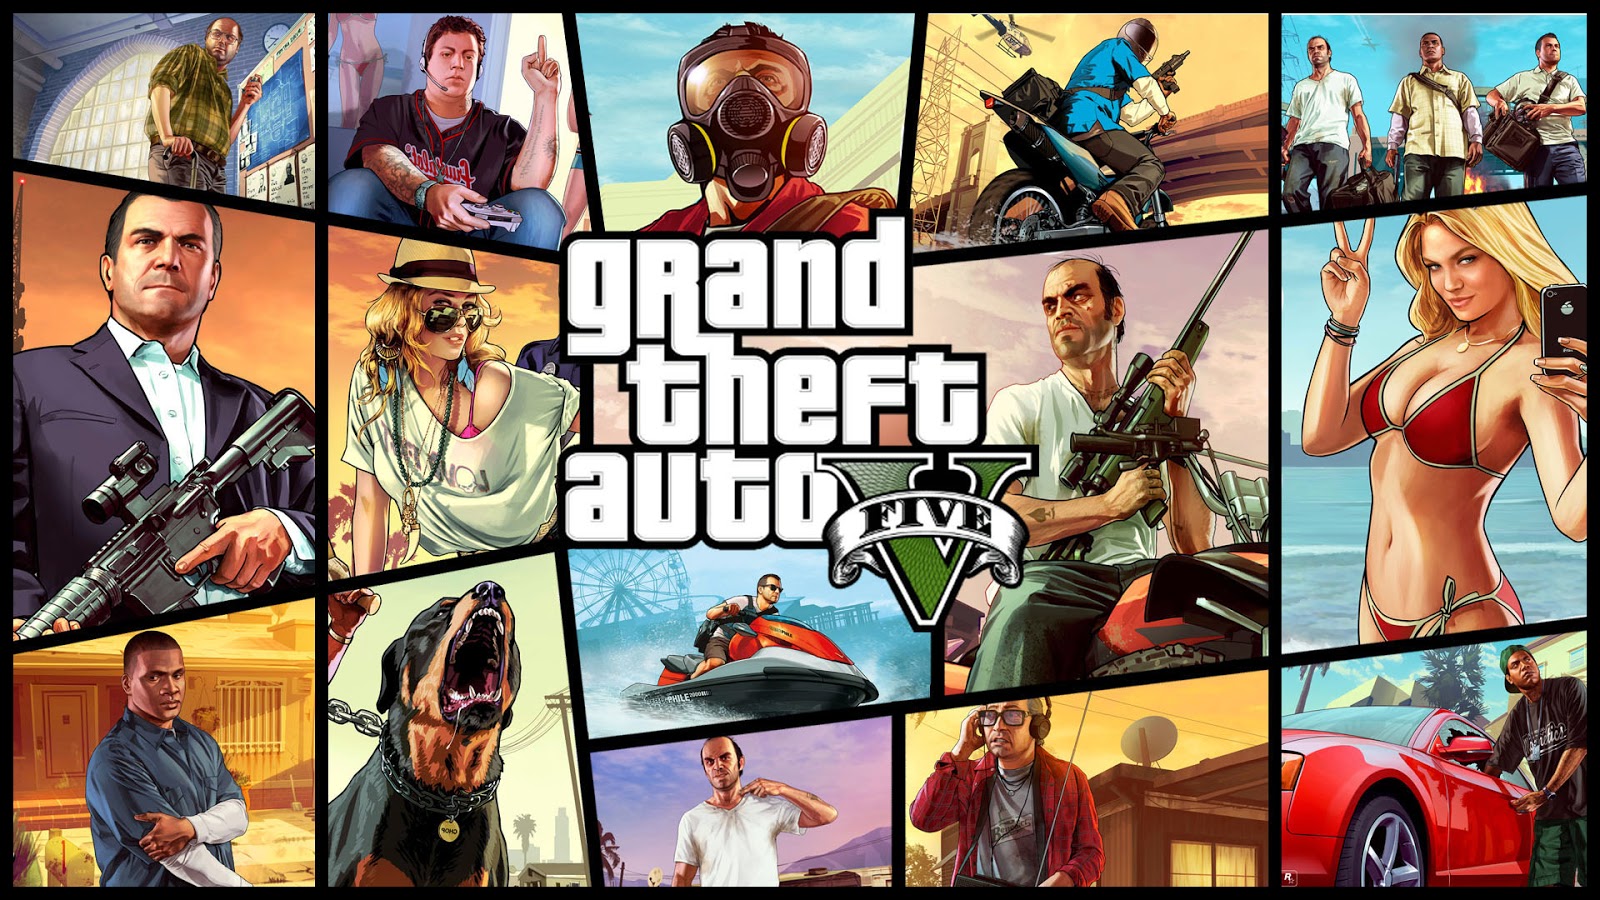 Download Grand Theft Auto 5 game for free Grand theft auto on Android and iPhone devices in 3 minutes